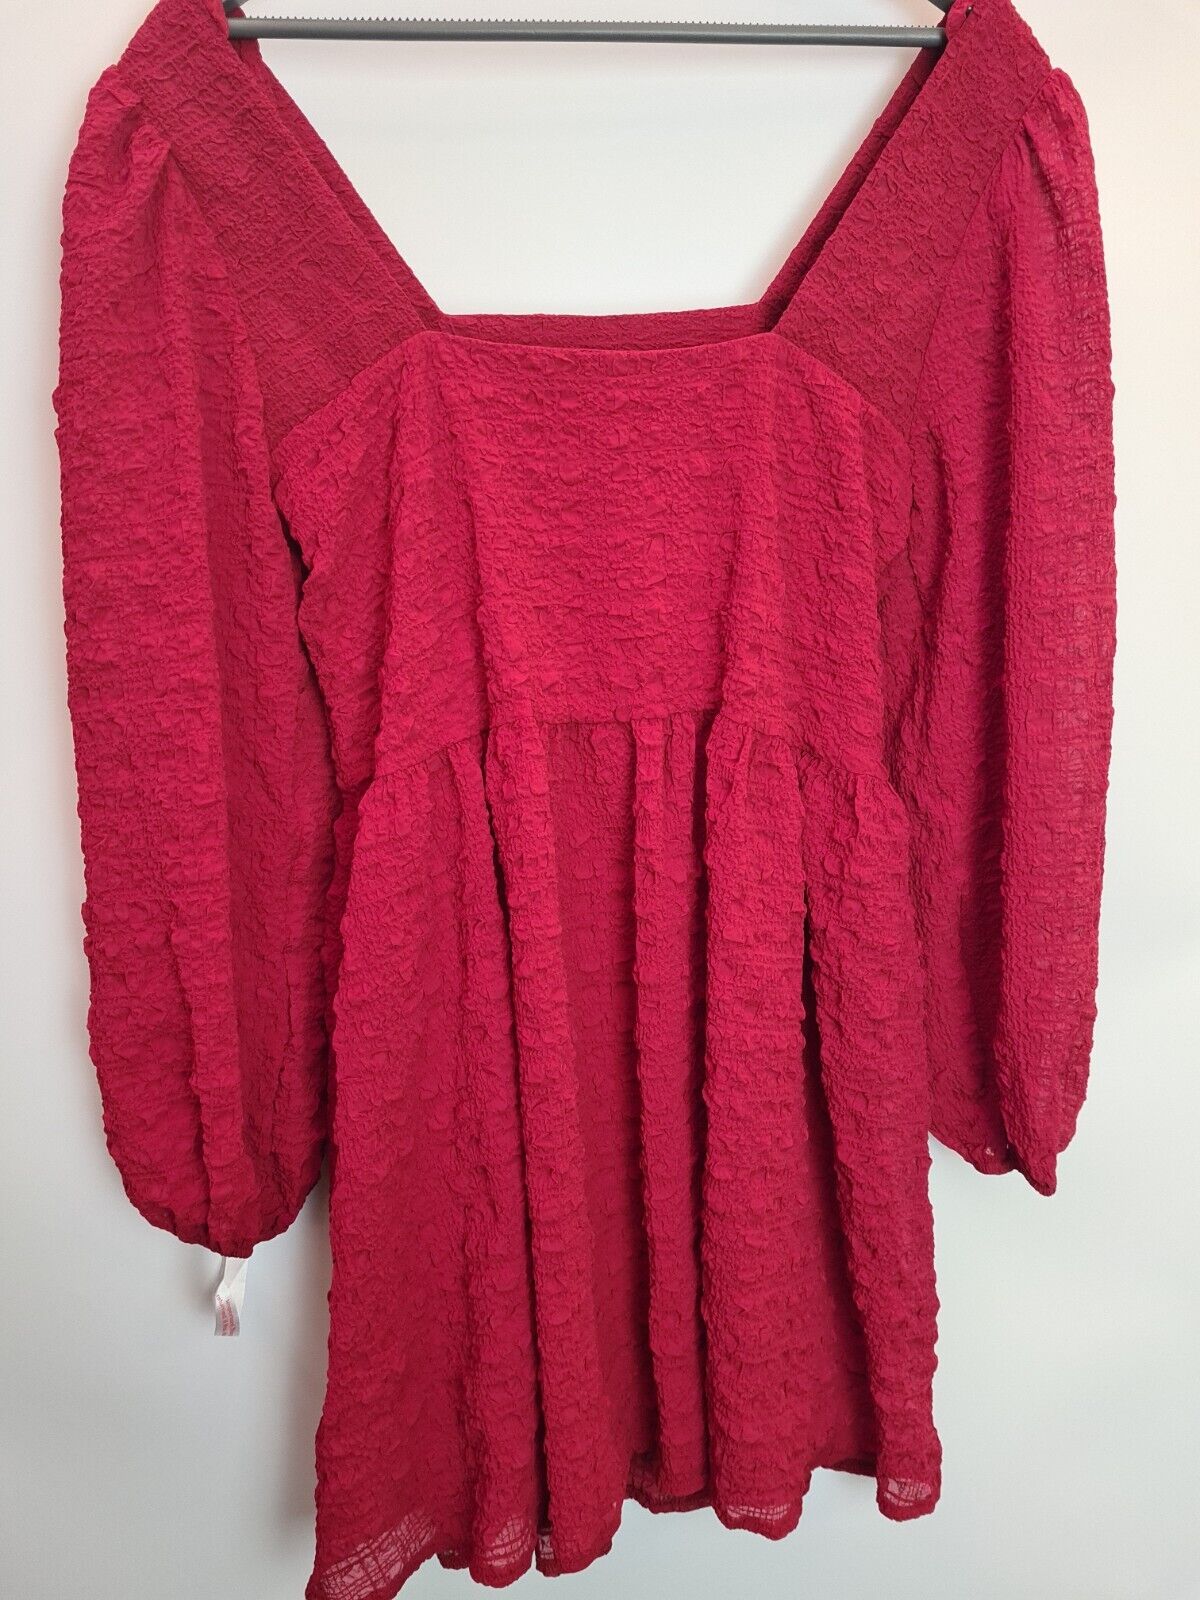 Missguided Square Neck Crinkle Red Smock Dress Size UK 16